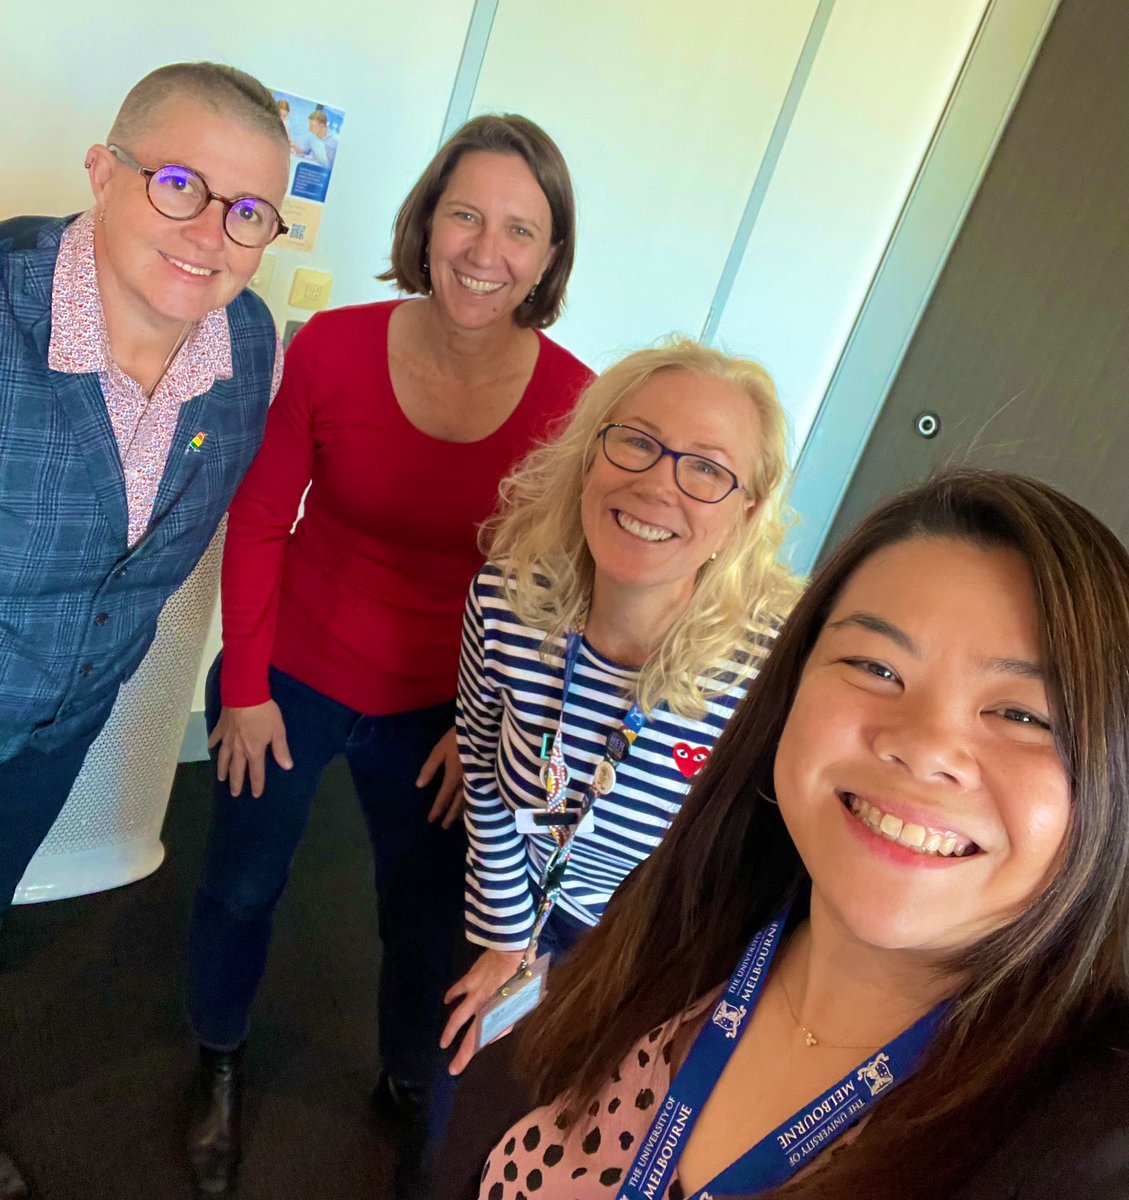 Smart women scheming about the power of #teamwork in #healthcare. Hold tight, #Australia, we have some great ideas to help make you even better! #BetterTogether #TopOfScope #NoSilos #Value #Valuable